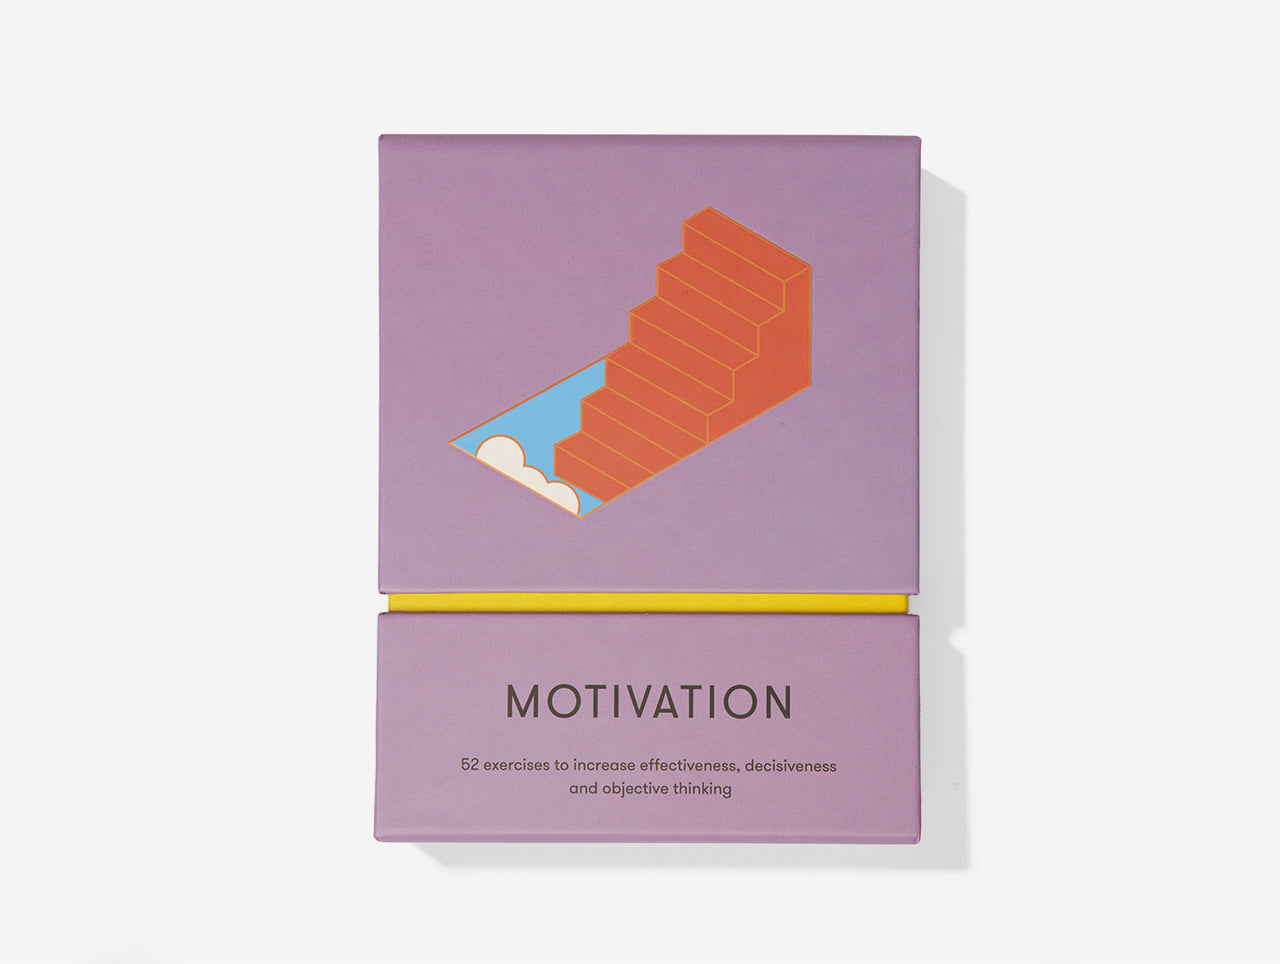 Image of a purple box of cards with the words 'MOTIVATION' at the bottom centre. Above centre is an illustration of a red staircase.